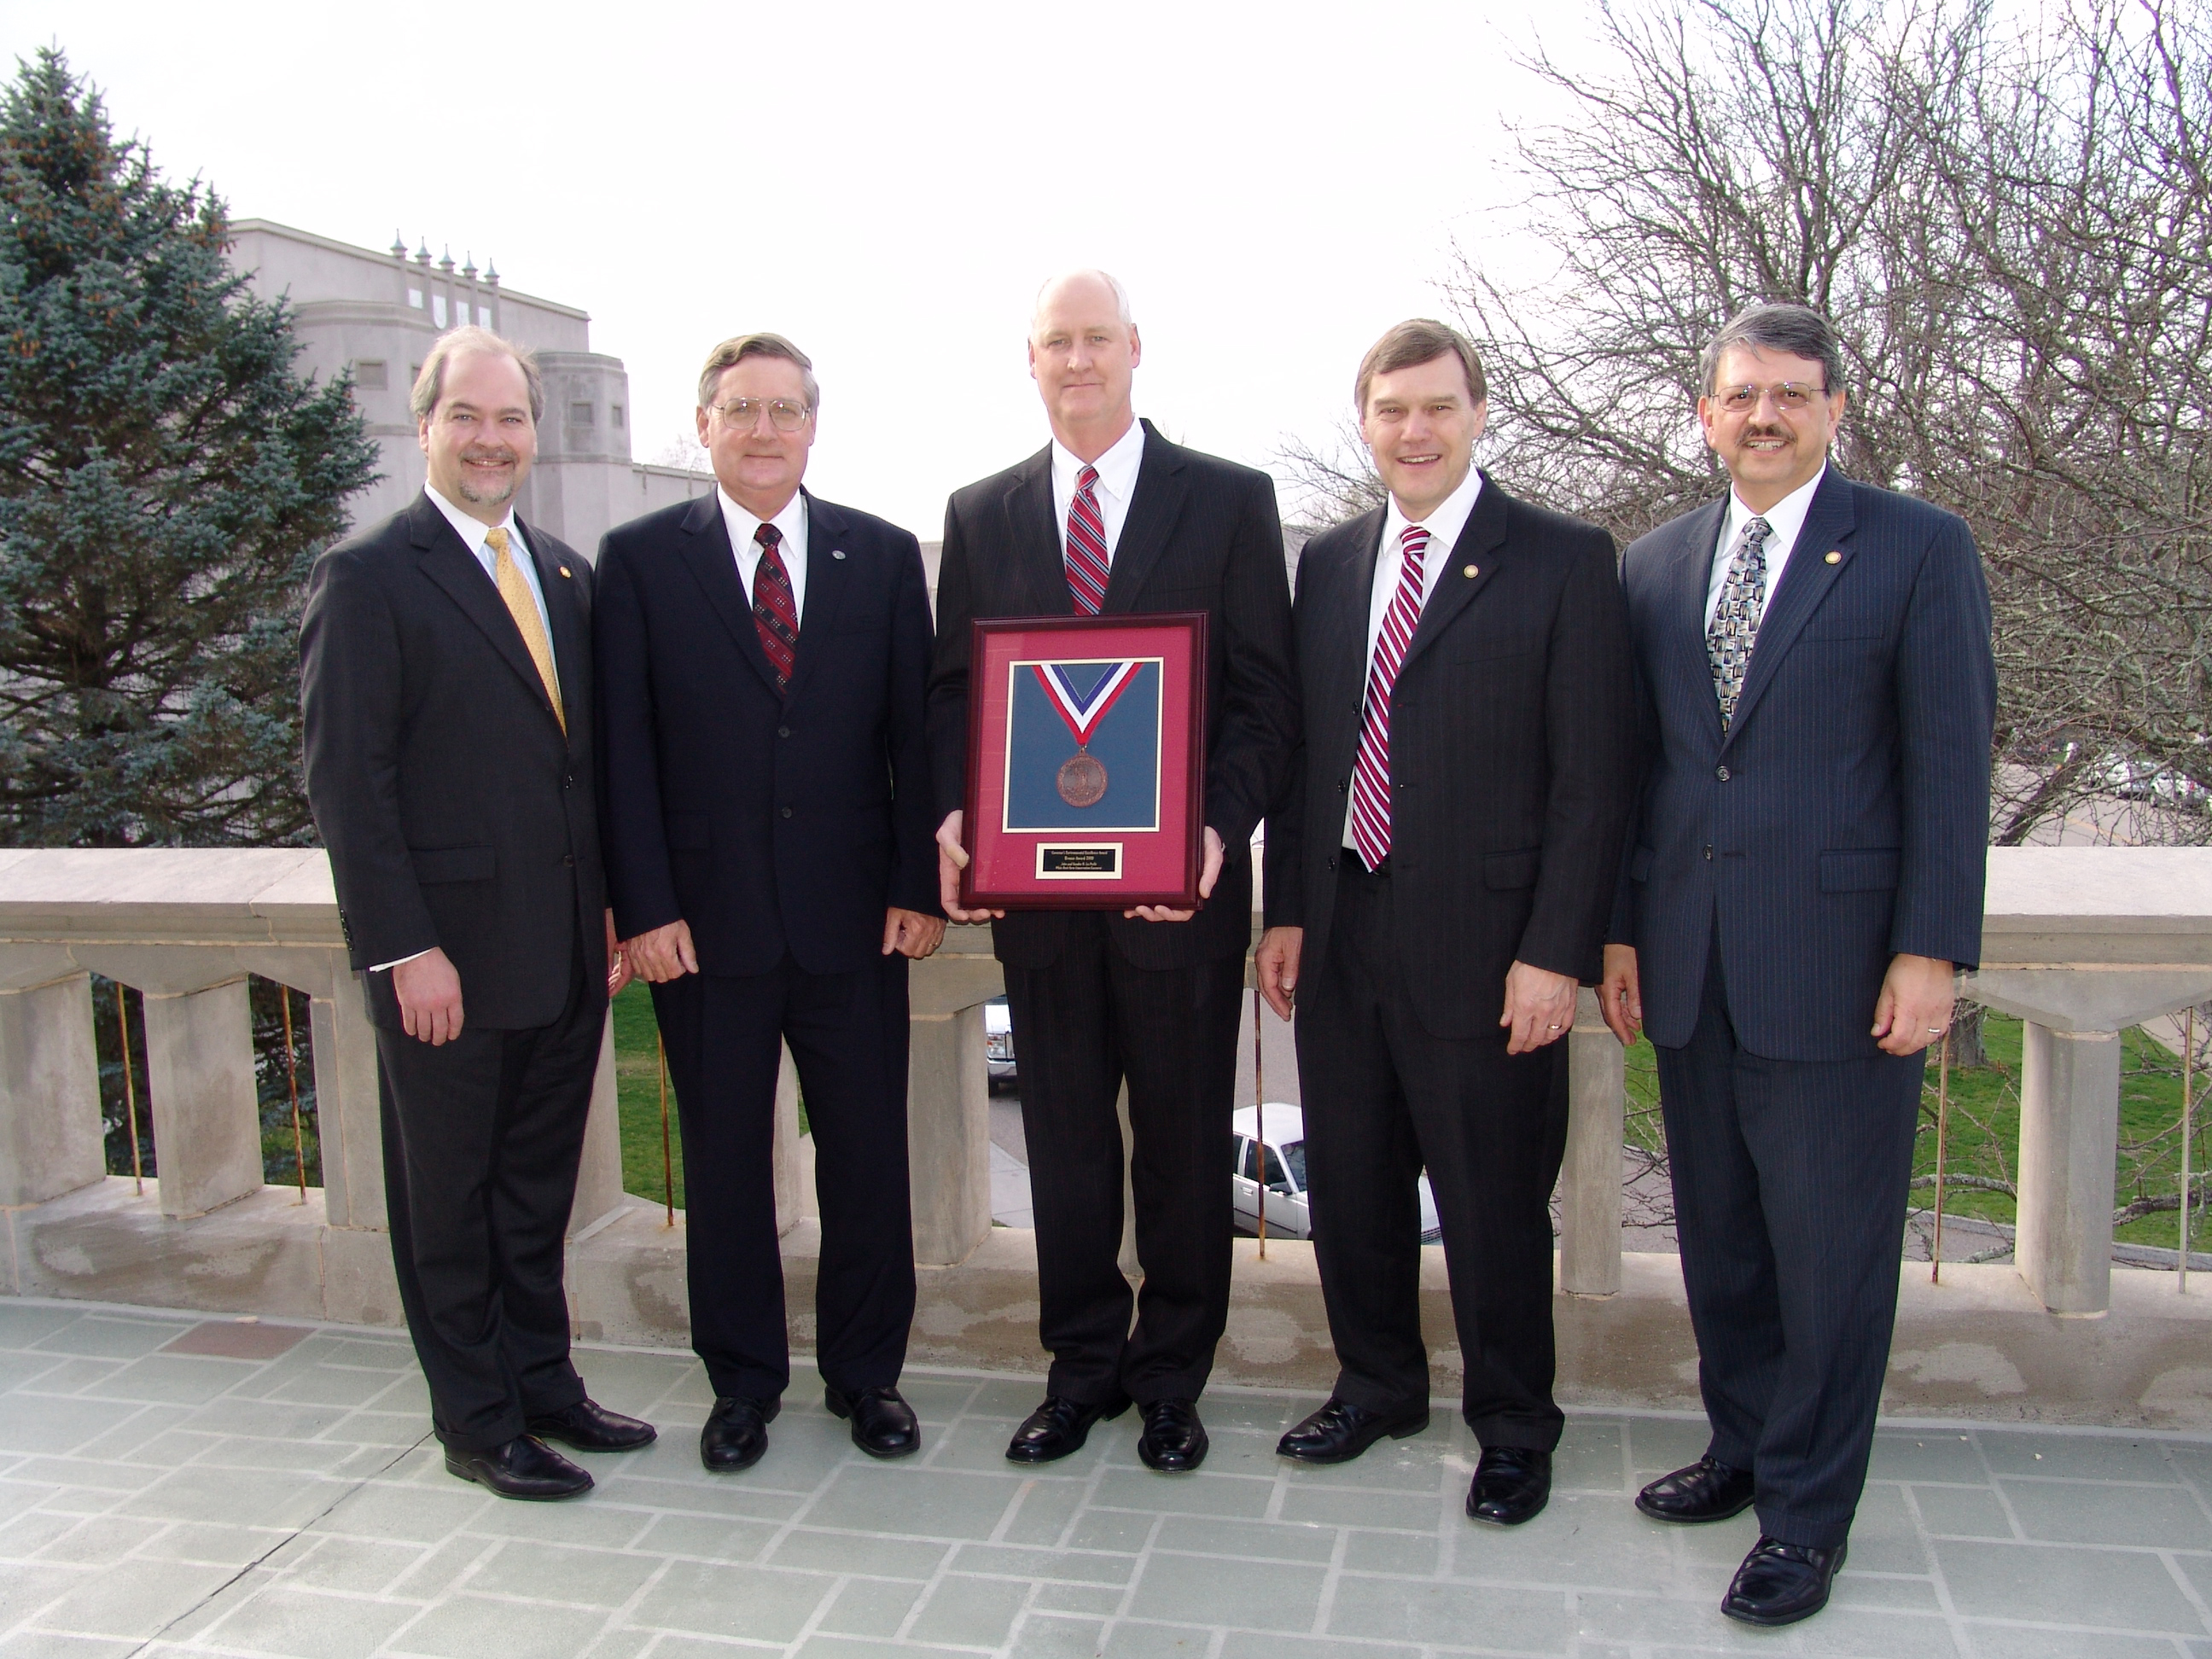 From left to right are Virginia's Secretary of Natural Resources L. Preston Bryant, Jr., Virginia Tech Sustainability Program Manger Denny Cochrane, Virginia Tech's Associate Vice President for Facilities Services Mike Coleman, Virginia's Director of Environmental Quality David Paylor, and Virginia's Director of Conservation and Recreation Joe Maroon.